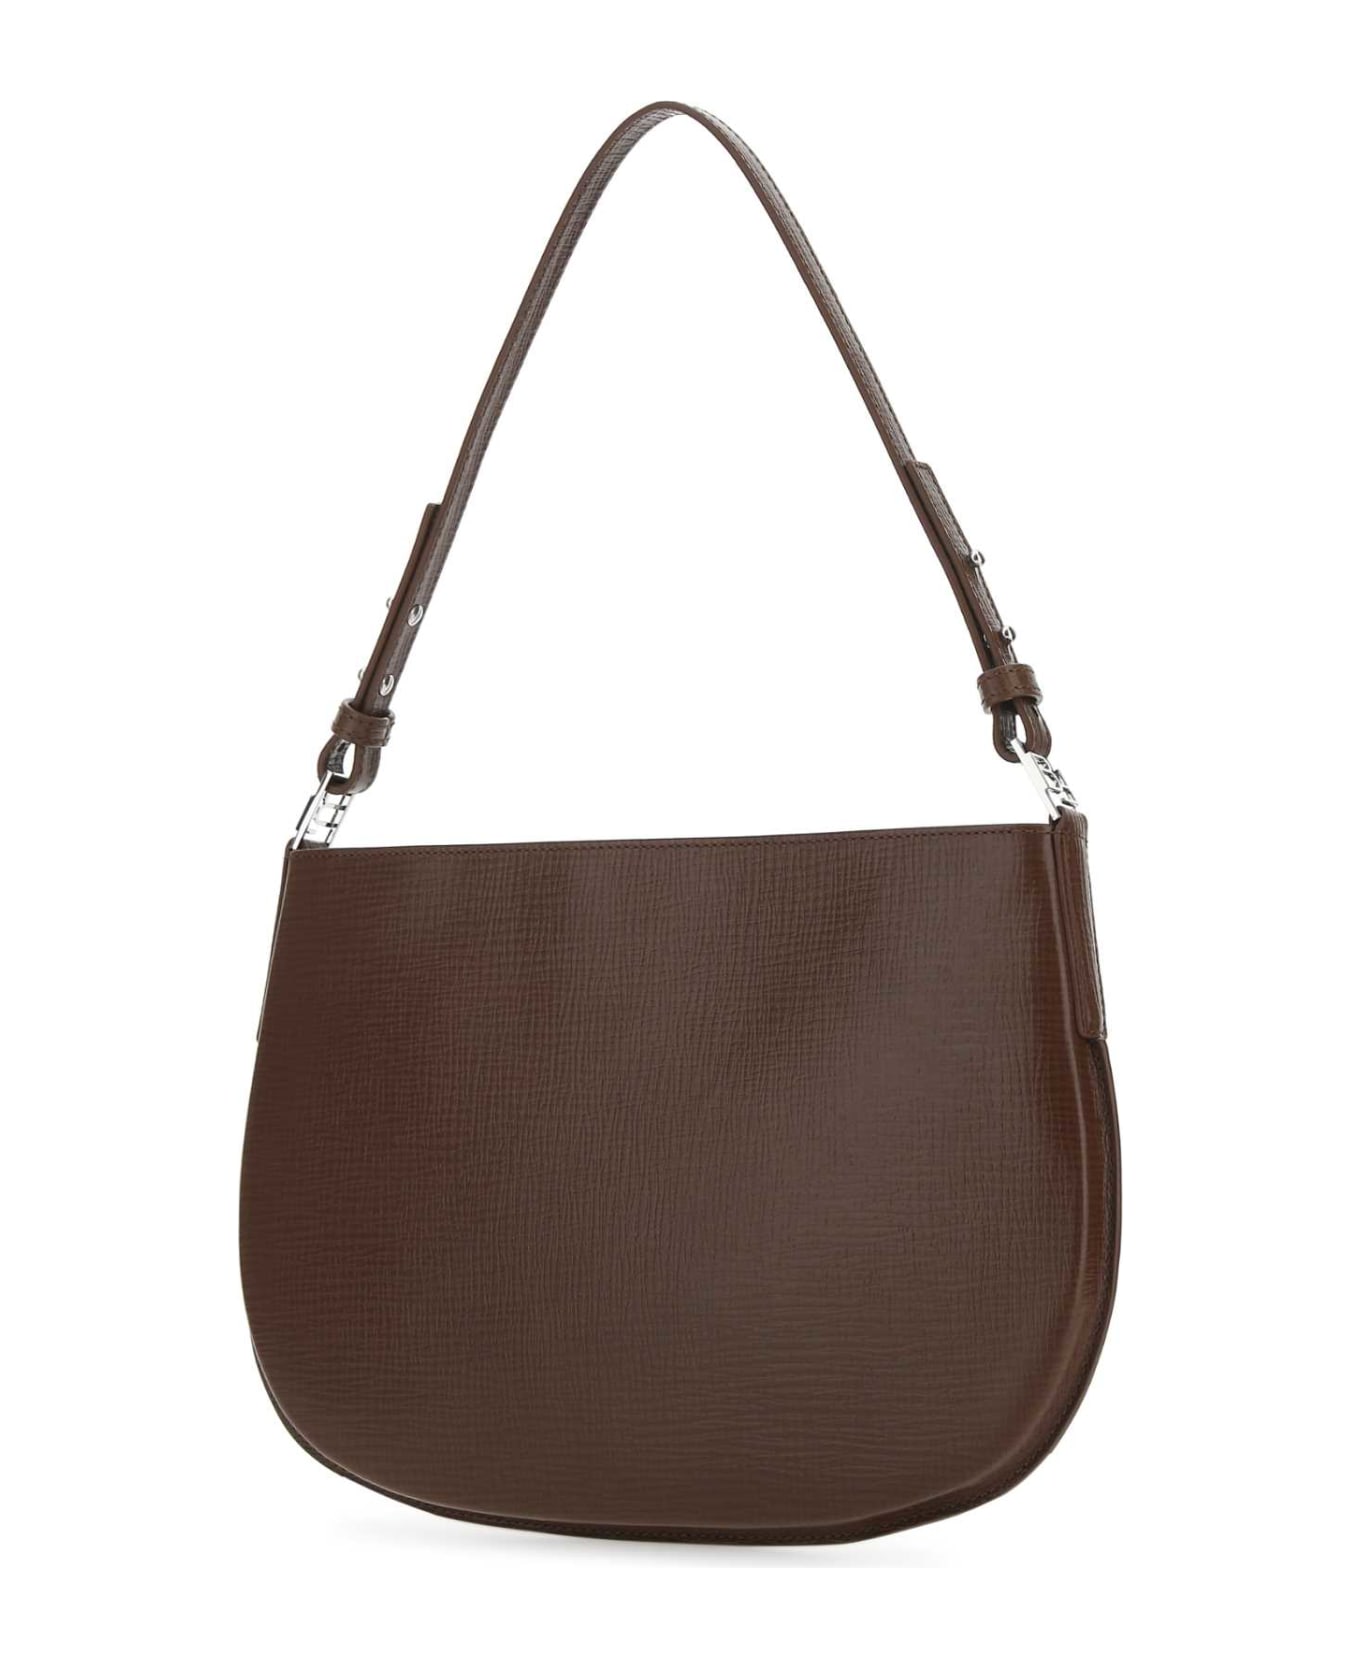 BY FAR Brown Leather Issa Shoulder Bag - TABAC トートバッグ